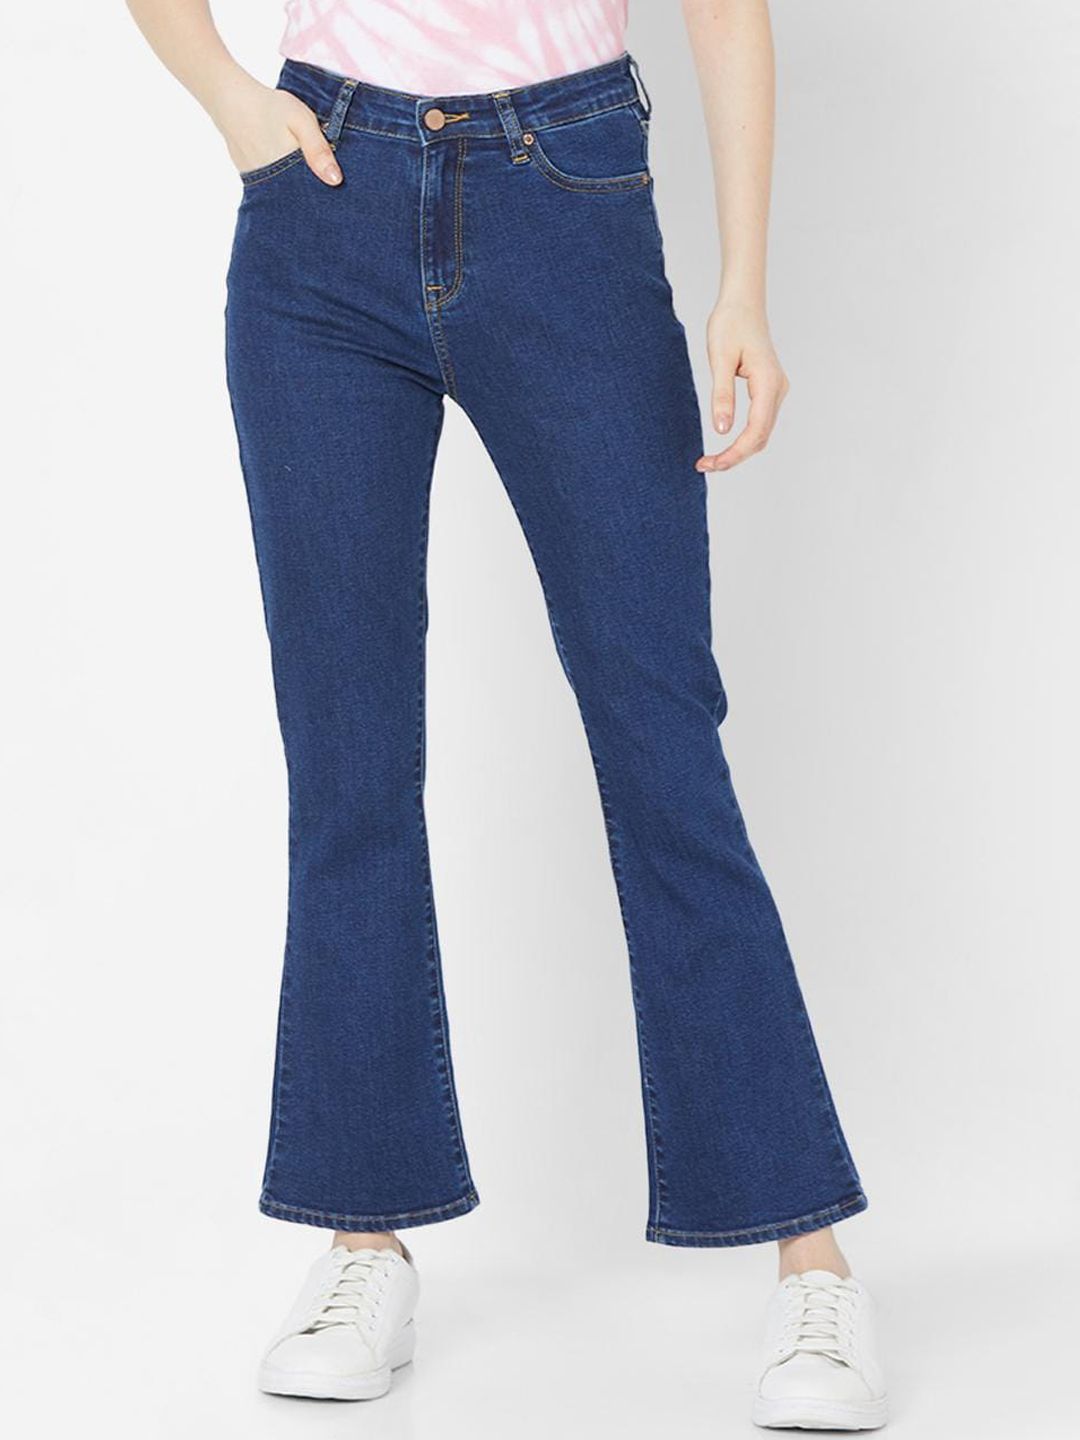 SPYKAR Women Blue Relaxed Fit Jeans Price in India